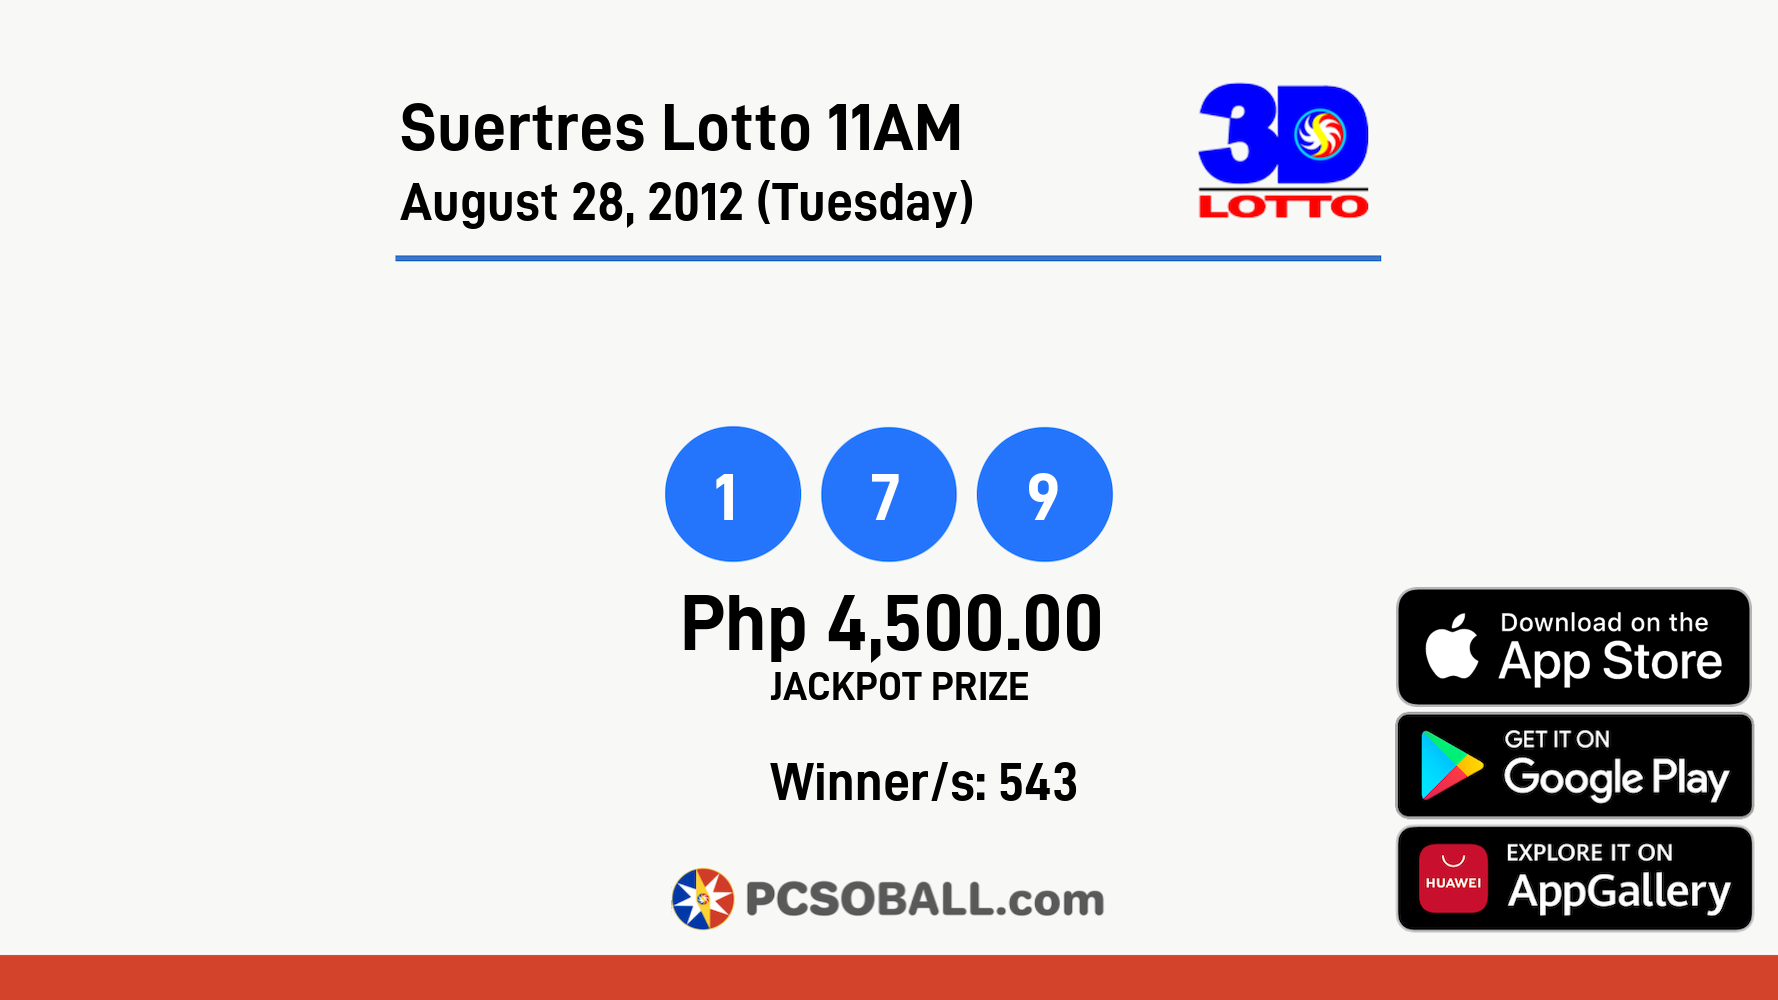 Suertres Lotto 11AM August 28, 2012 (Tuesday) Result